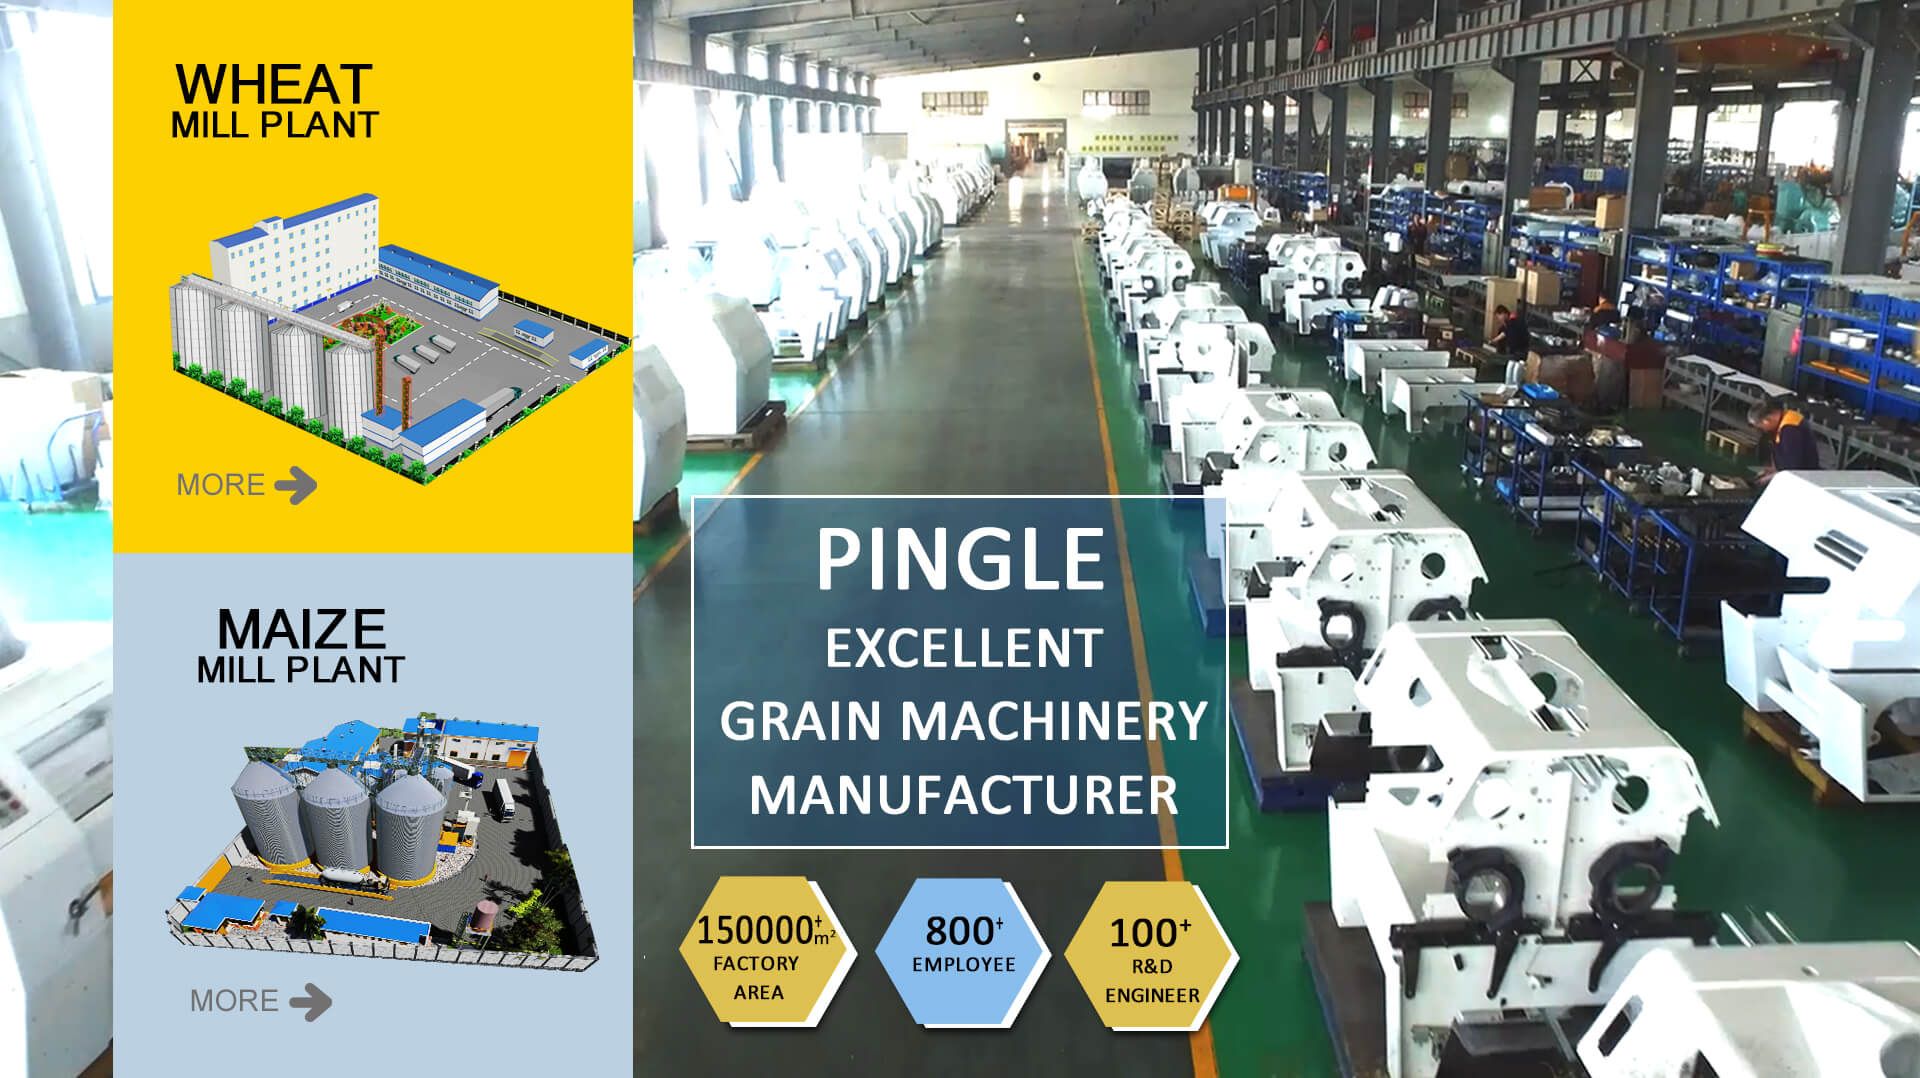 Pingle Excellent Grain Mill Machinery Manufacturer